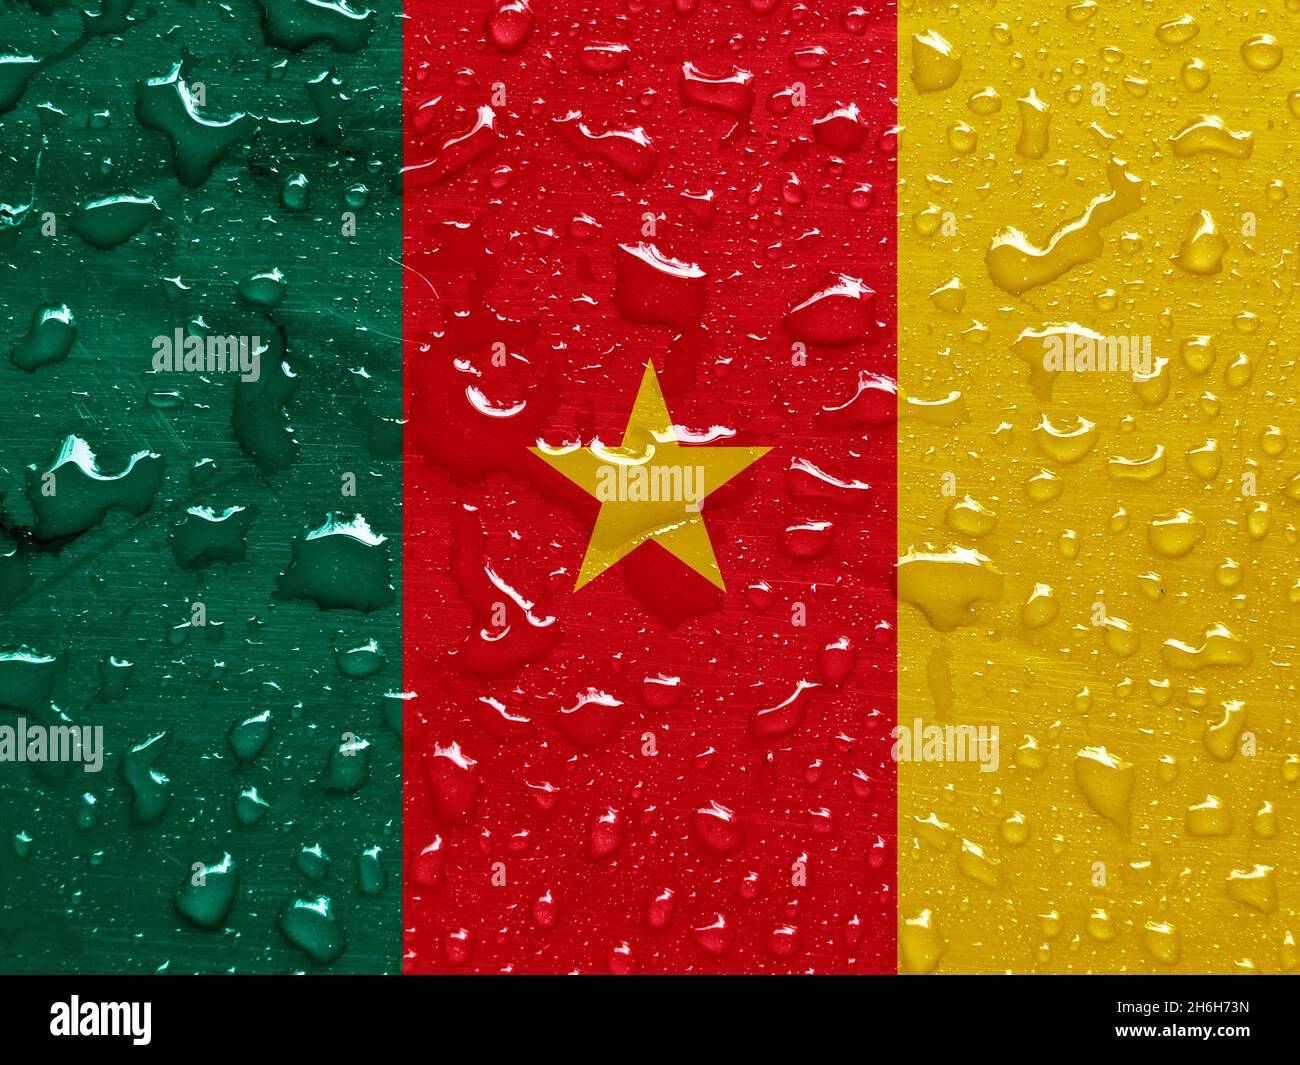 flag of Cameroon with rain drops Stock Photo